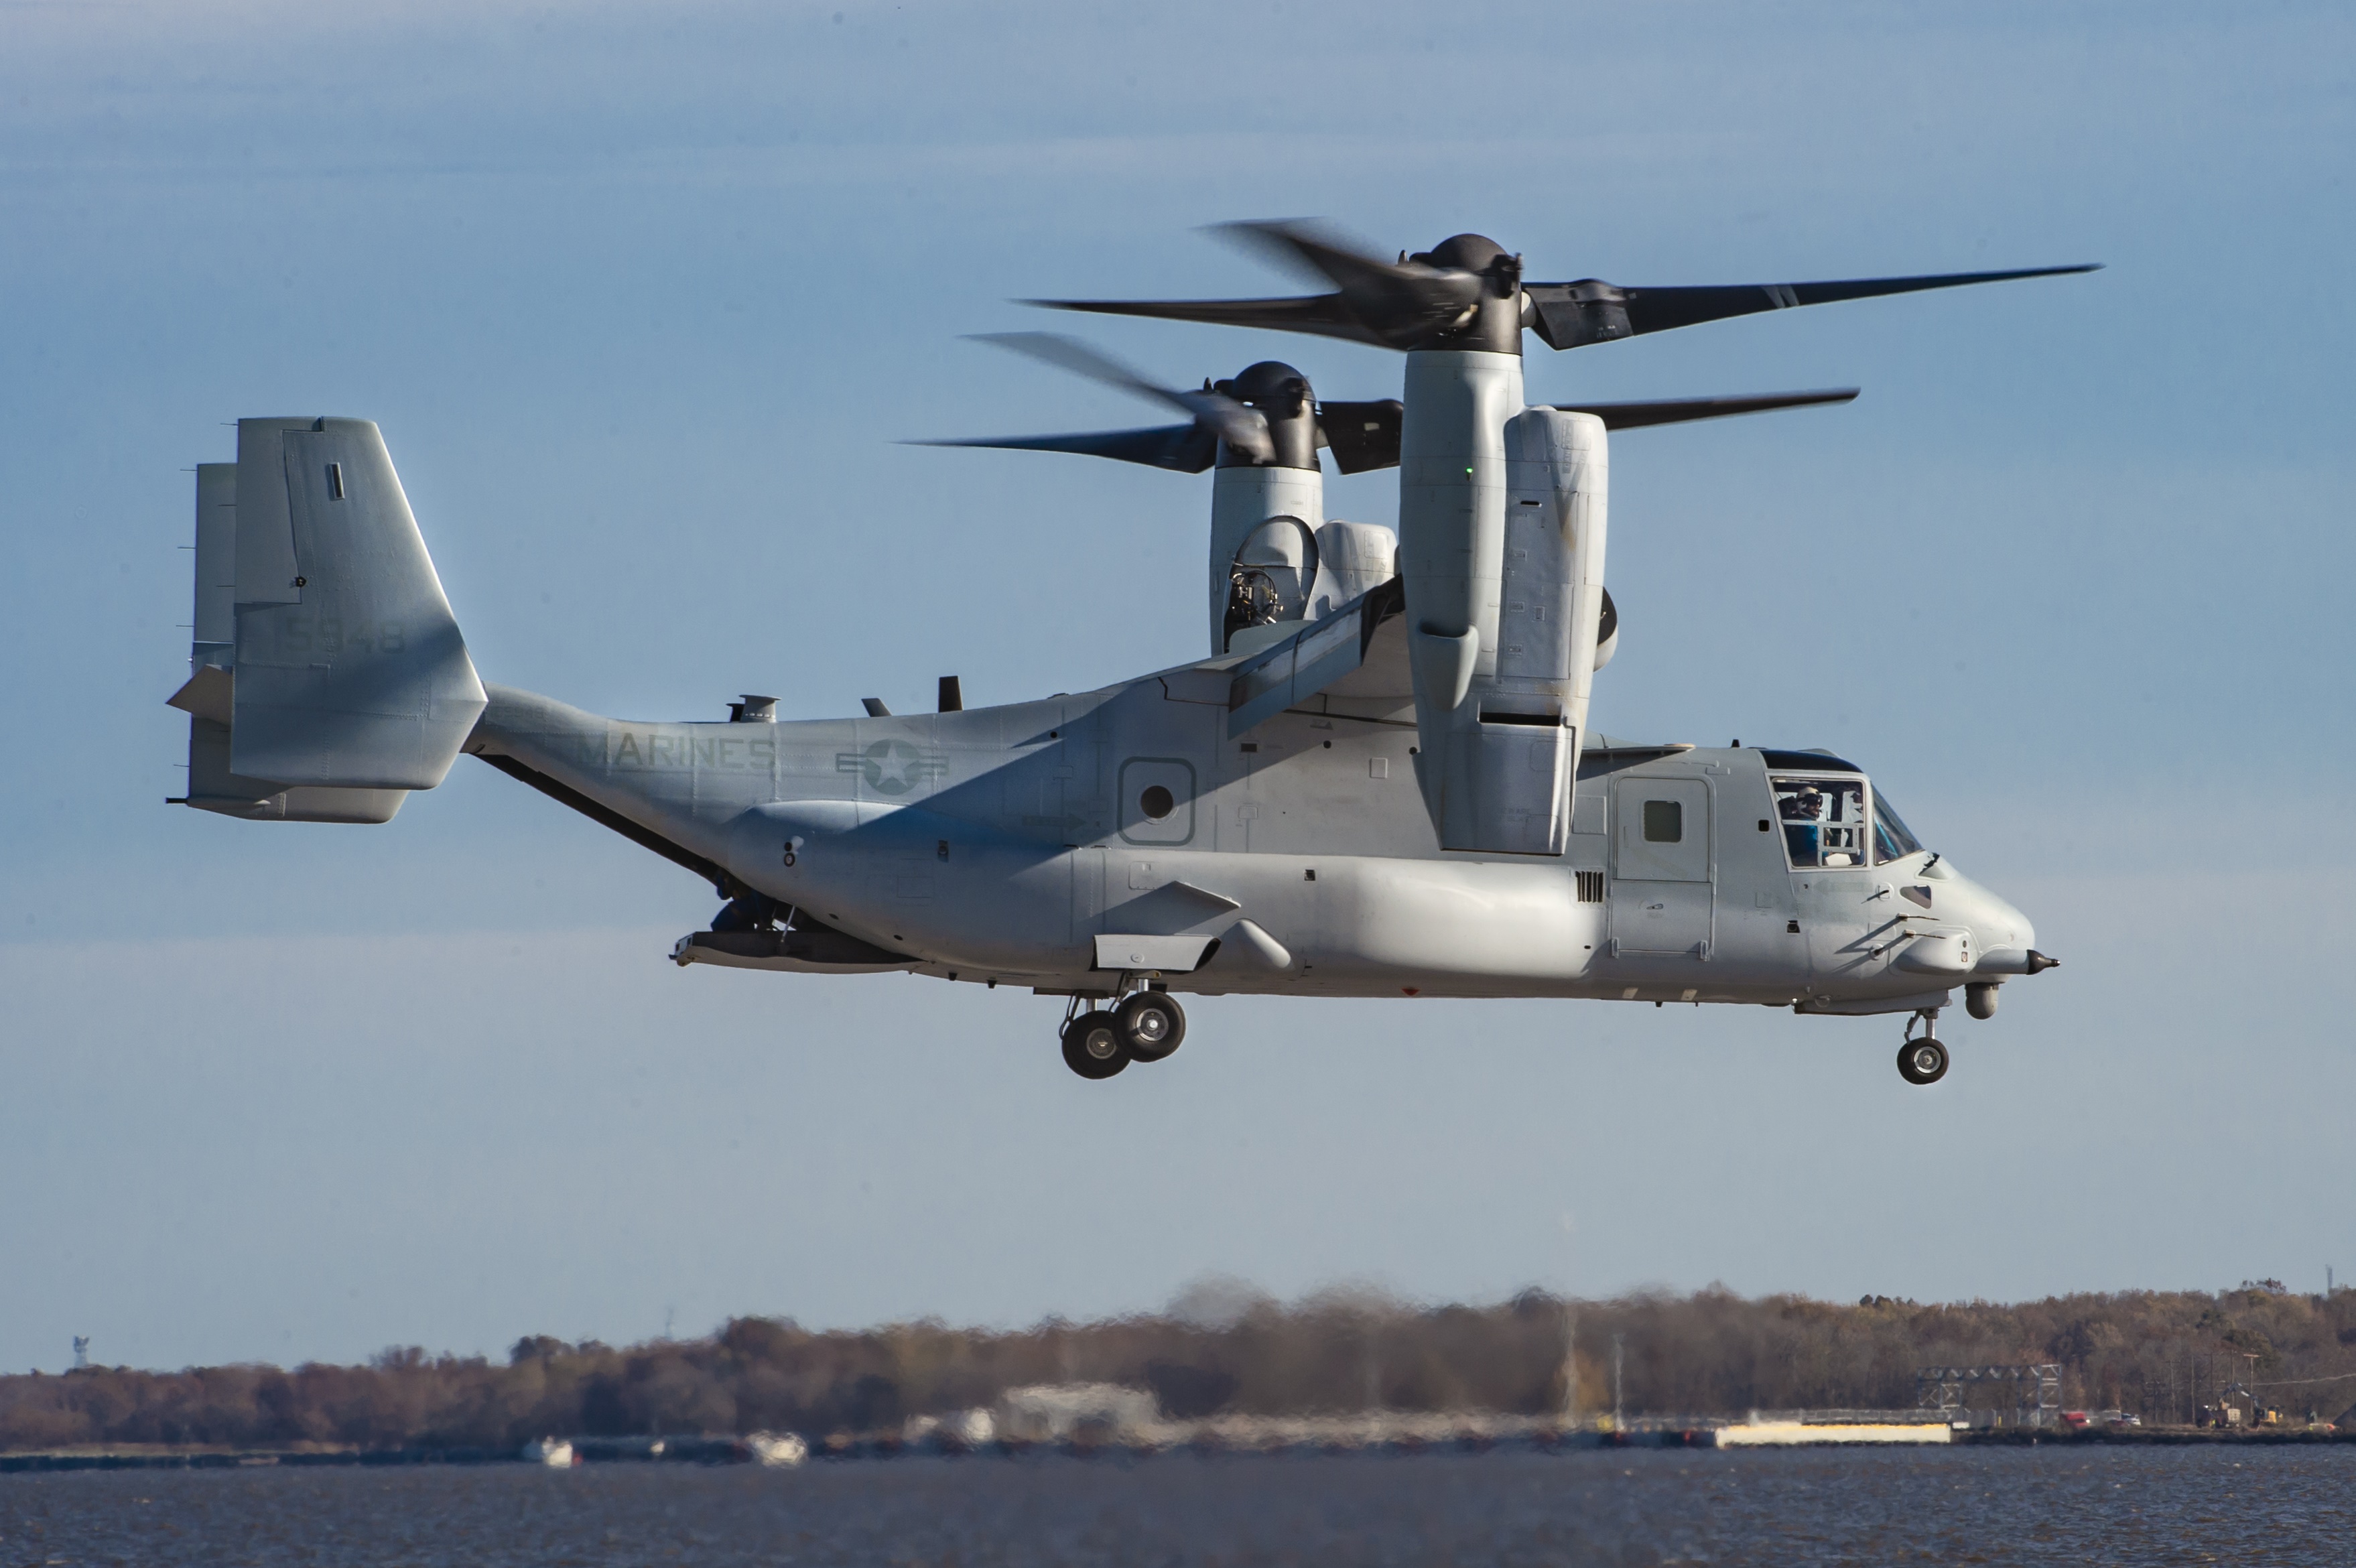 Boeing test pilots conduct the maiden flight of the first V-22 Osprey under the Common Configuration â€“ Readiness and Modernization (CC-RAM) program which is to be delivered to the U.S. Marine Corps.